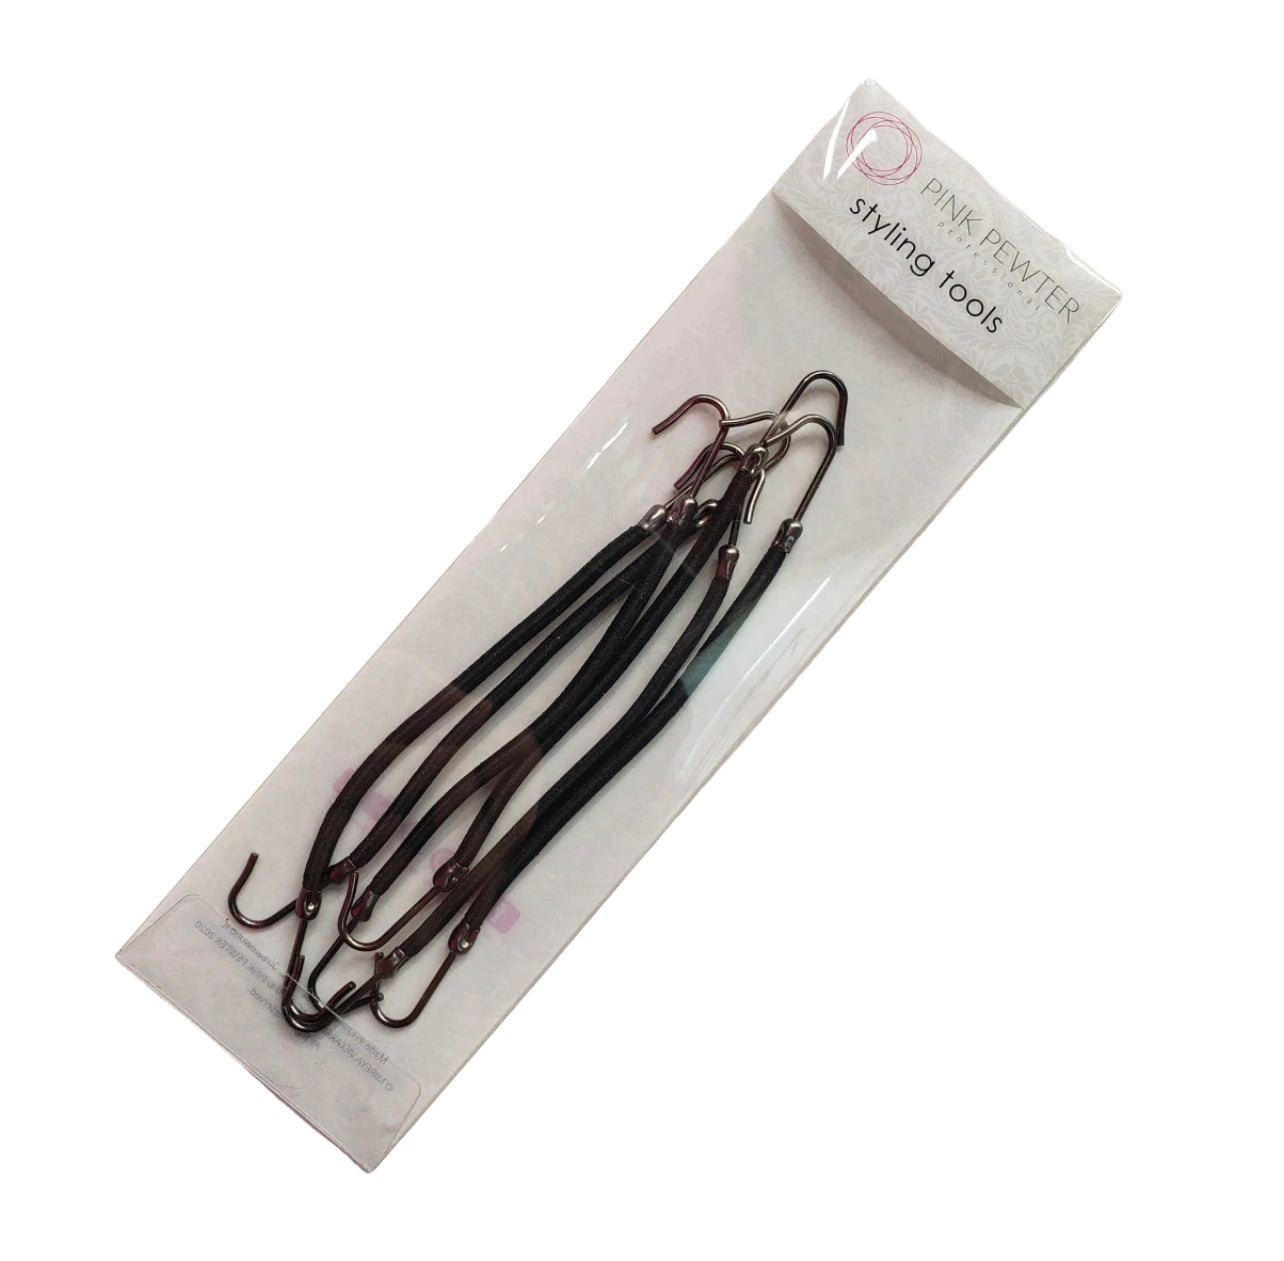 Pink Pewter Bungee Professional Quality Elastics With Hooks - 6pc 5" Black Phoenix Nationale